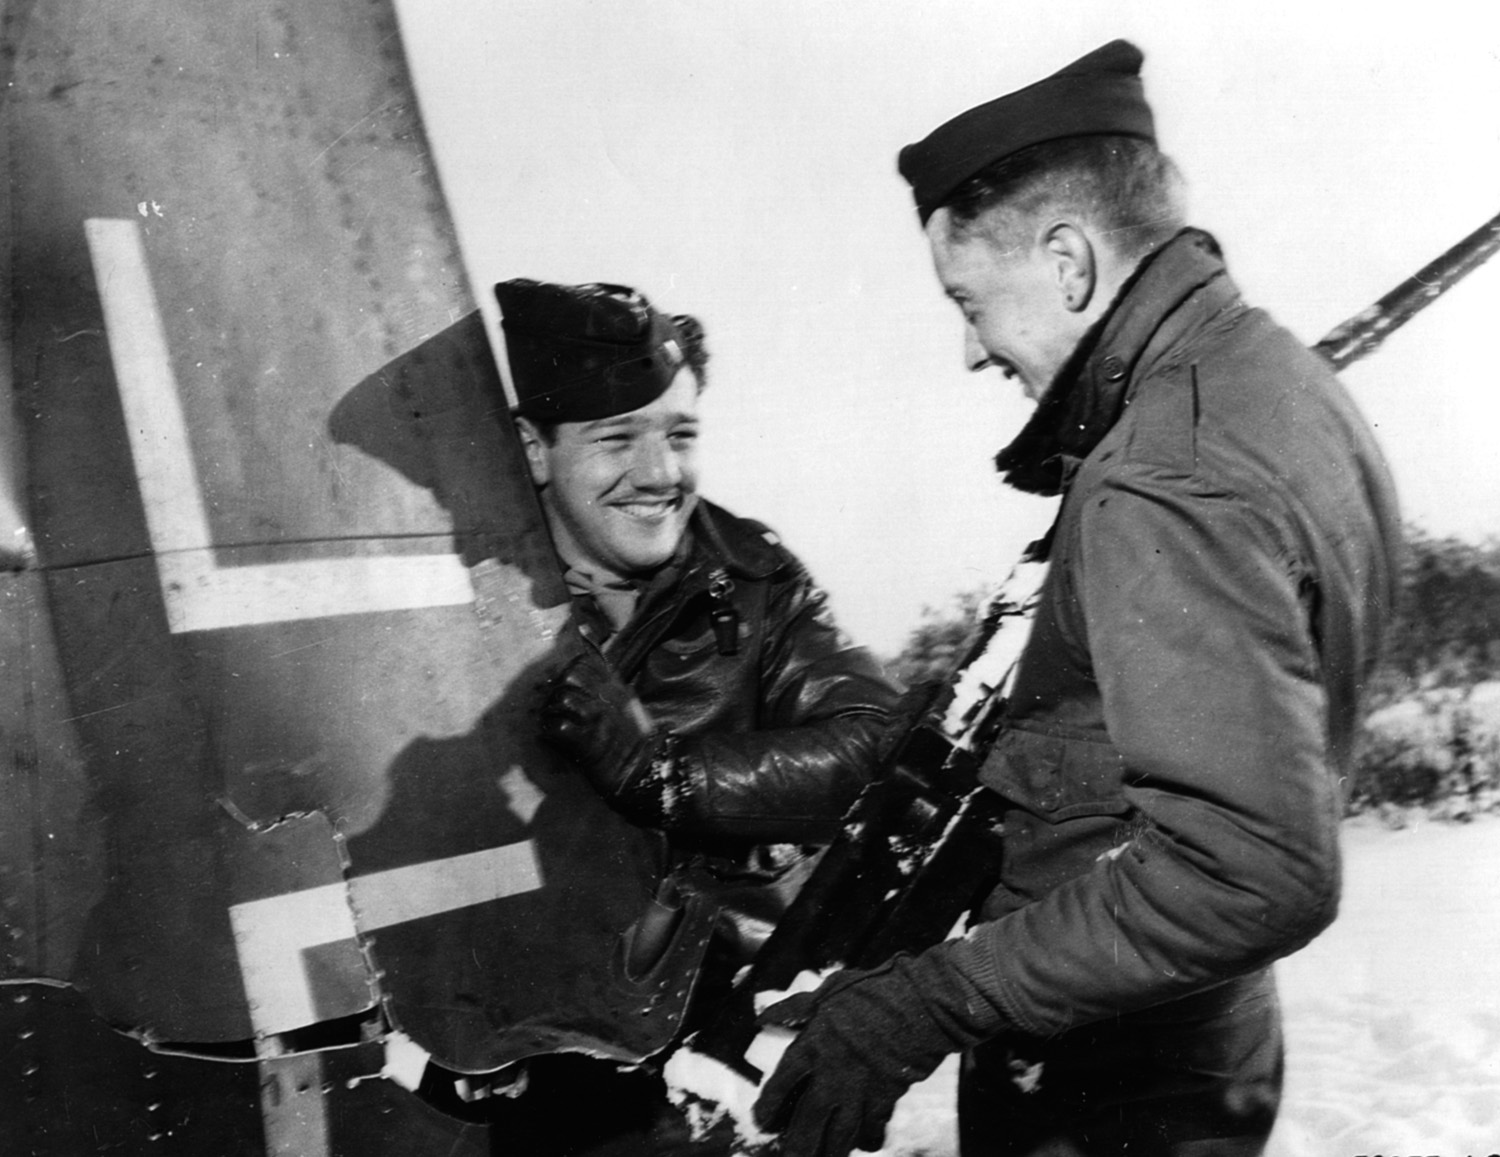 Second Lieutenant Melvin B. Paisley (left) and Second Lieutenant John J. Kennedy examine pieces of a Luftwaffe plane knocked out over Belgium in Operation Bodenplatte.